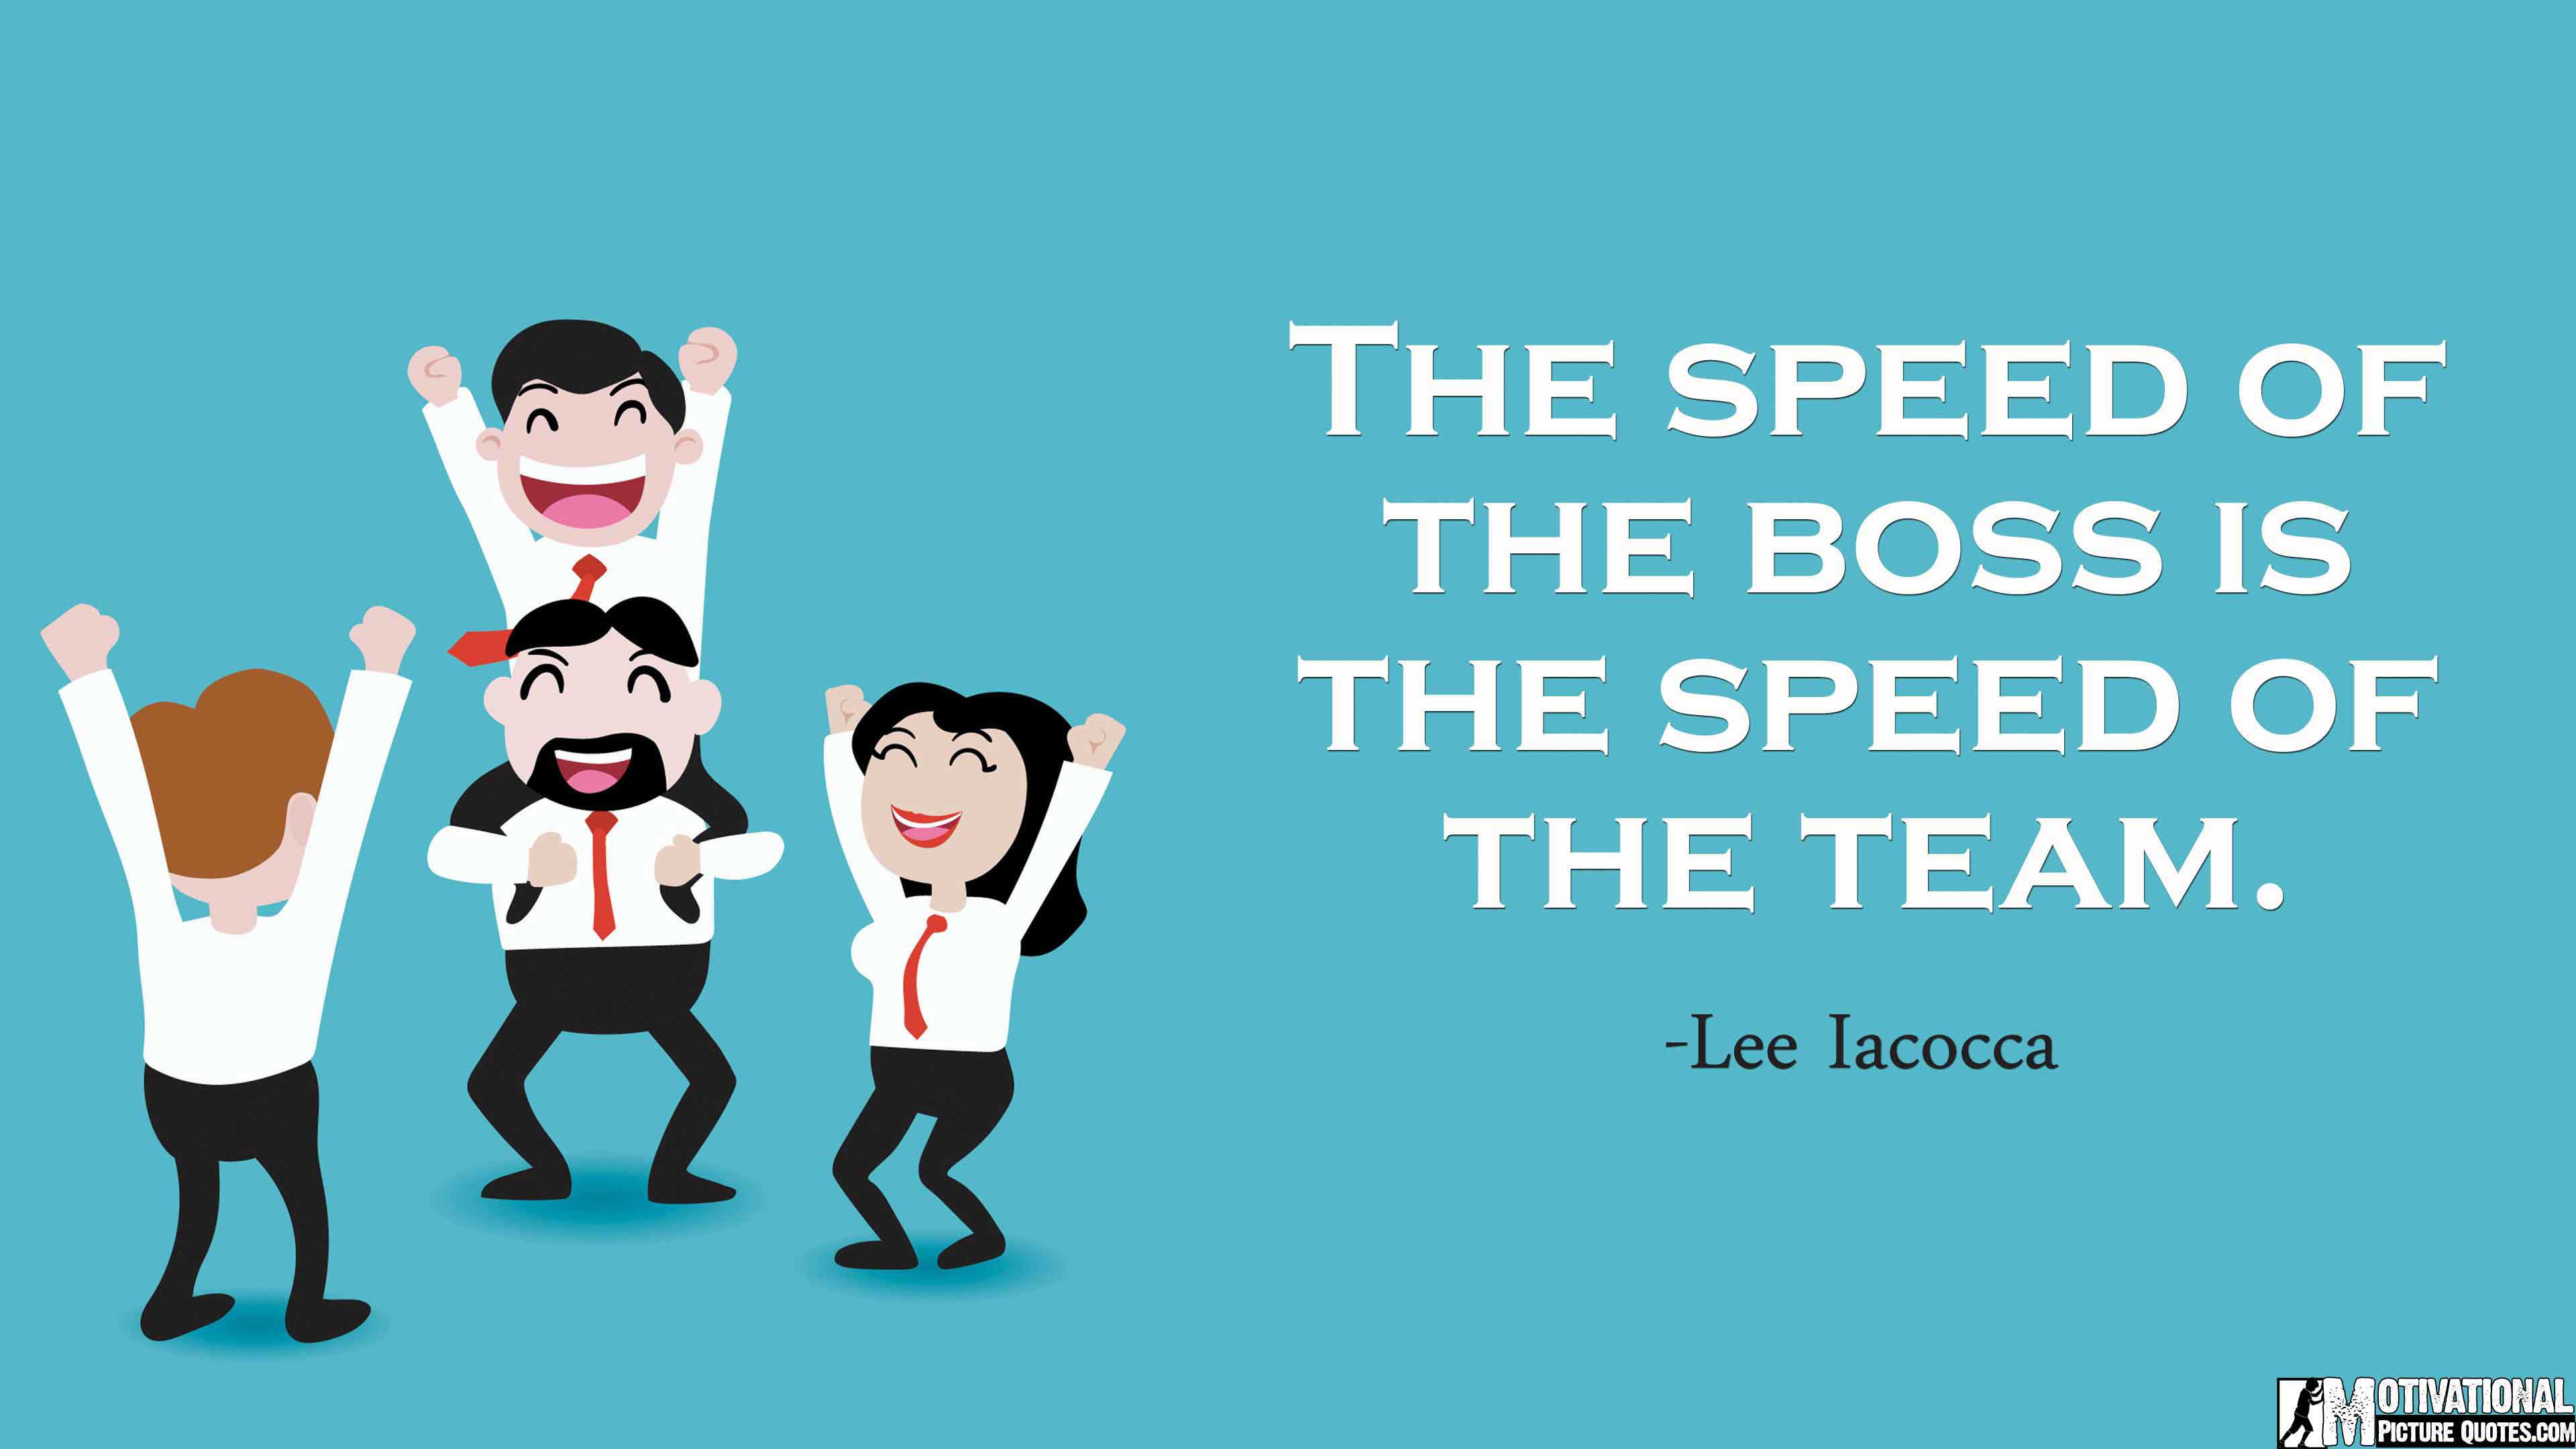 Team Building Quotes For The Workplace